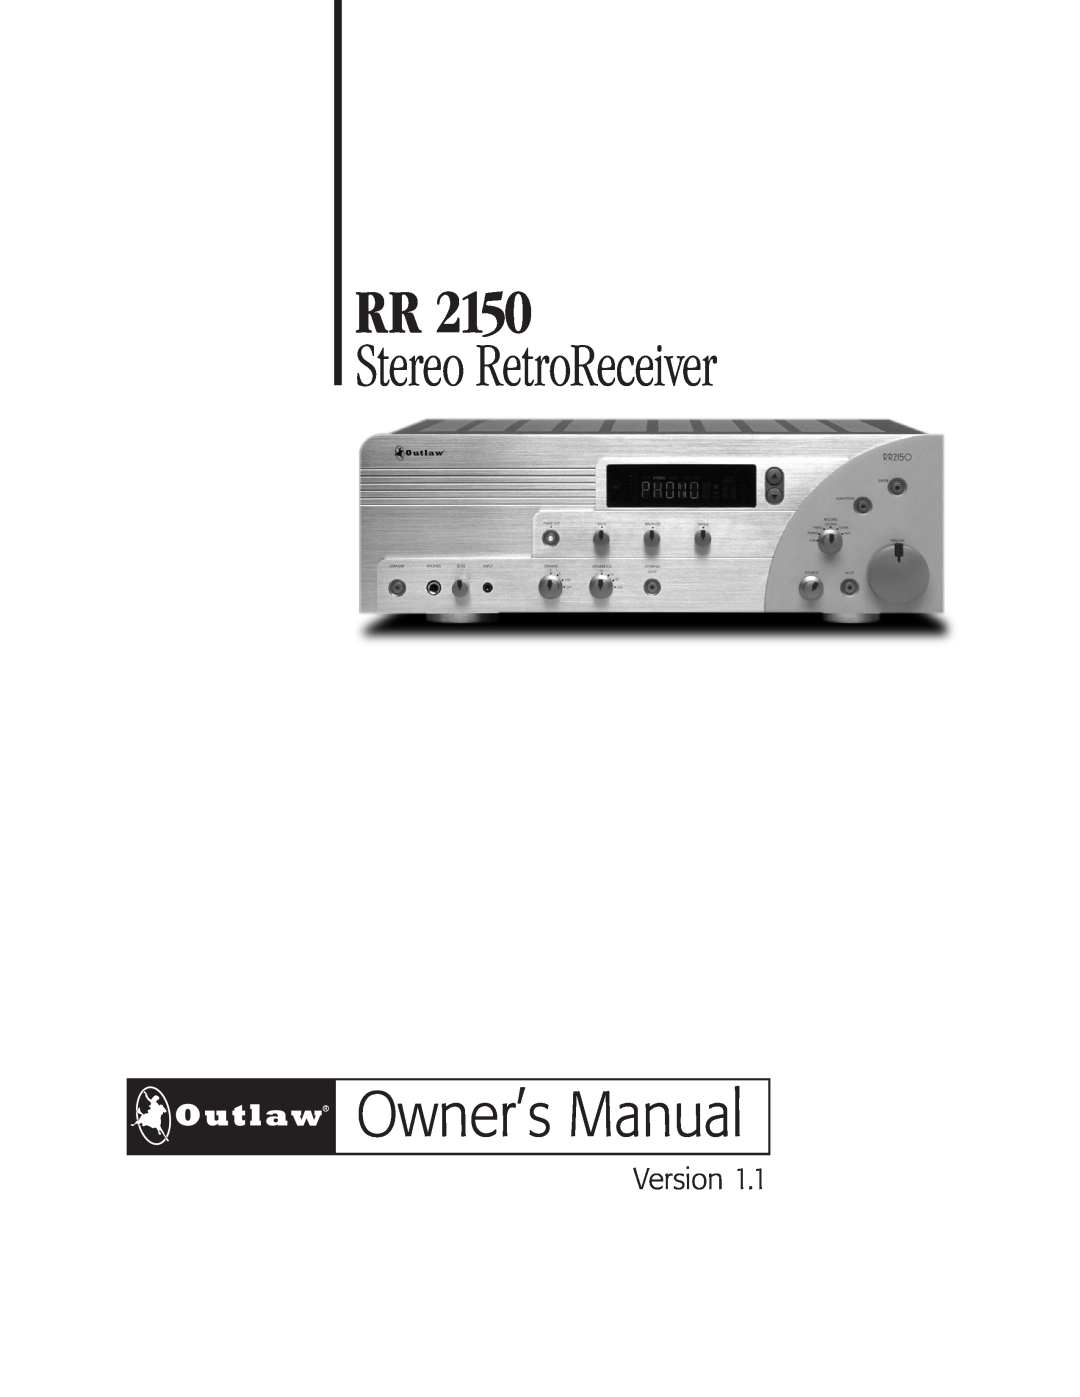 Outlaw Audio RR 2150 owner manual Stereo RetroReceiver, Version 